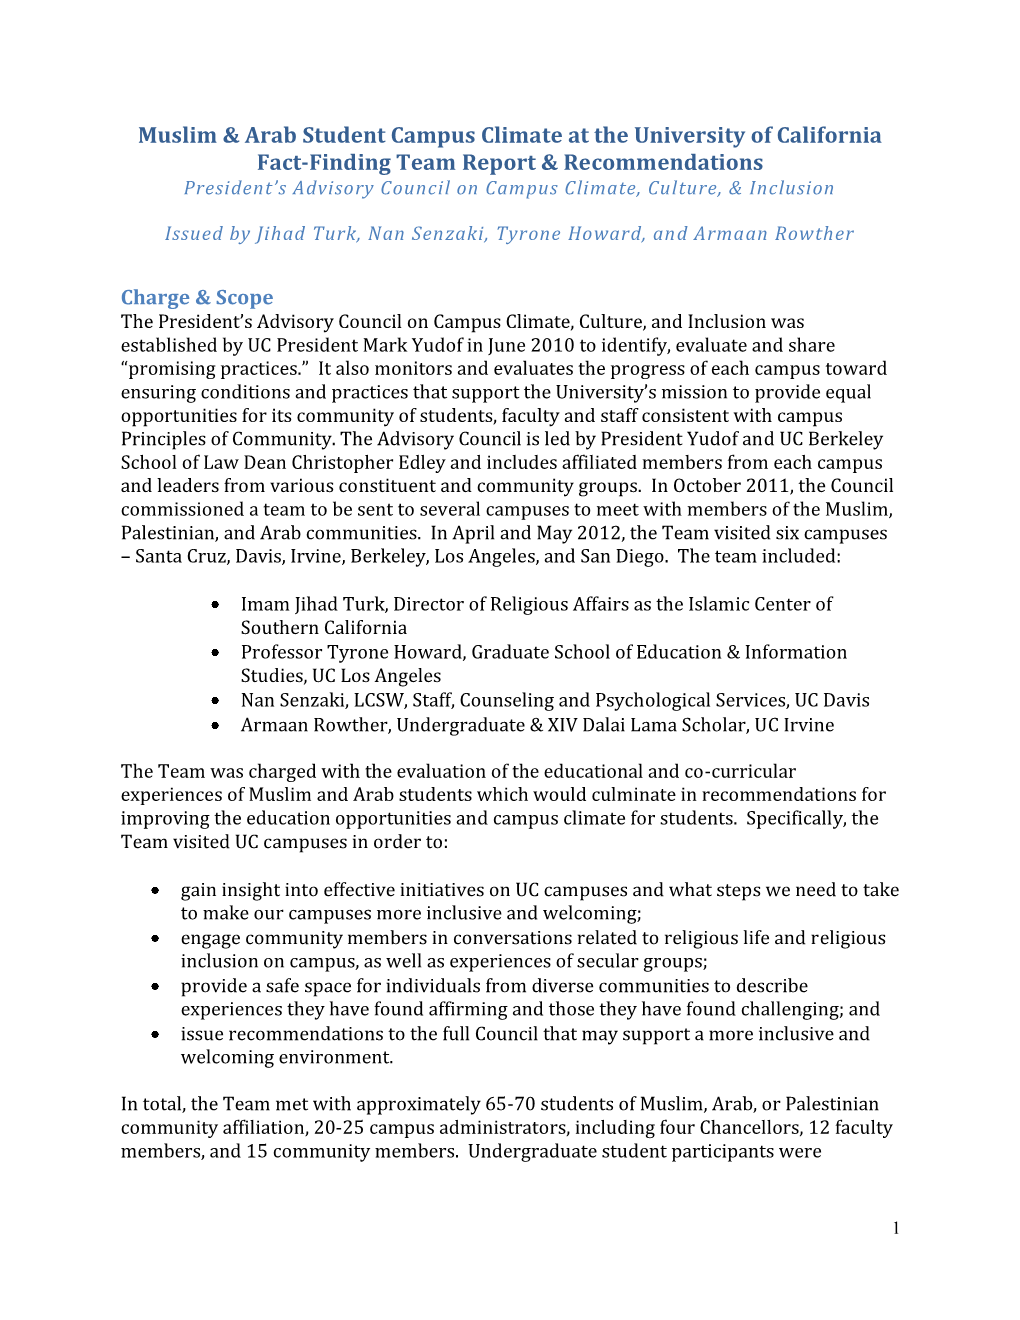 Muslim & Arab Student Campus Climate at the University of California Fact-Finding Team Report & Recommendations